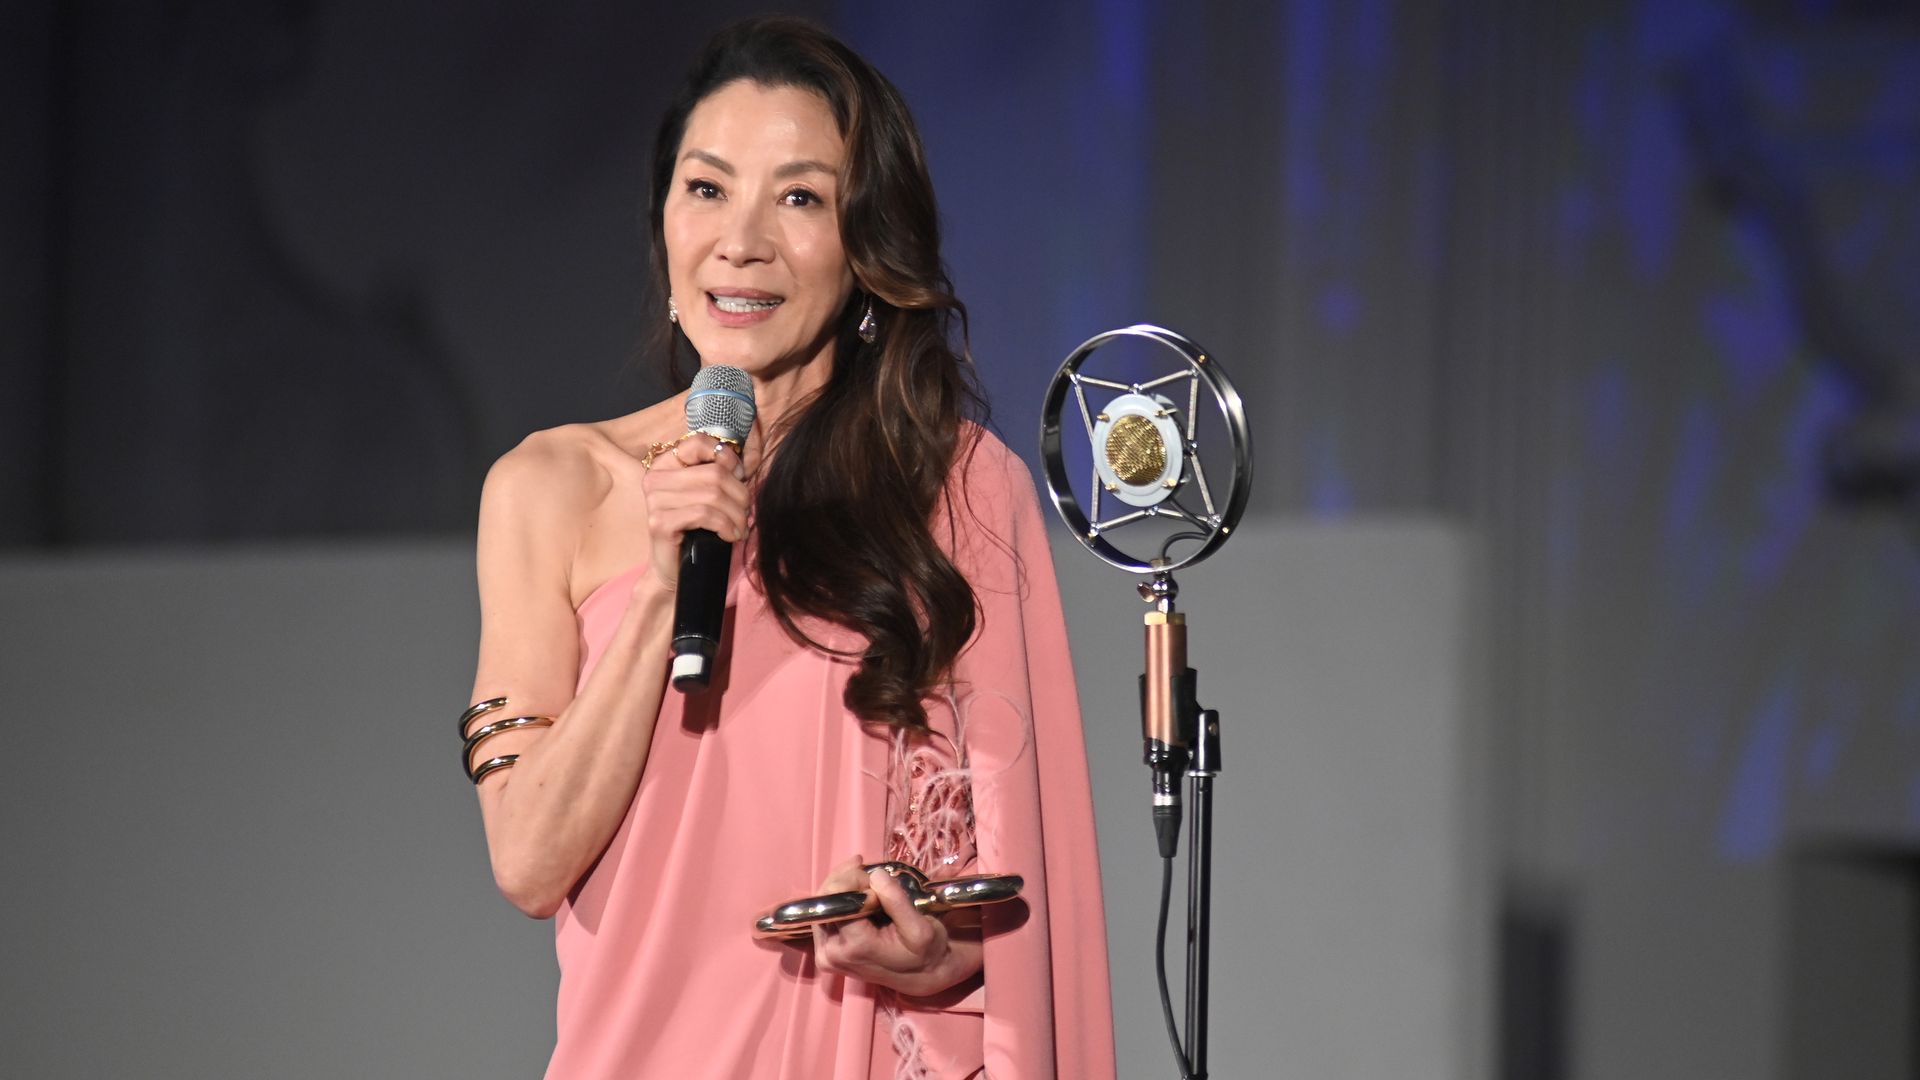 actress Michelle Yeoh on stage accepting award in pink dress